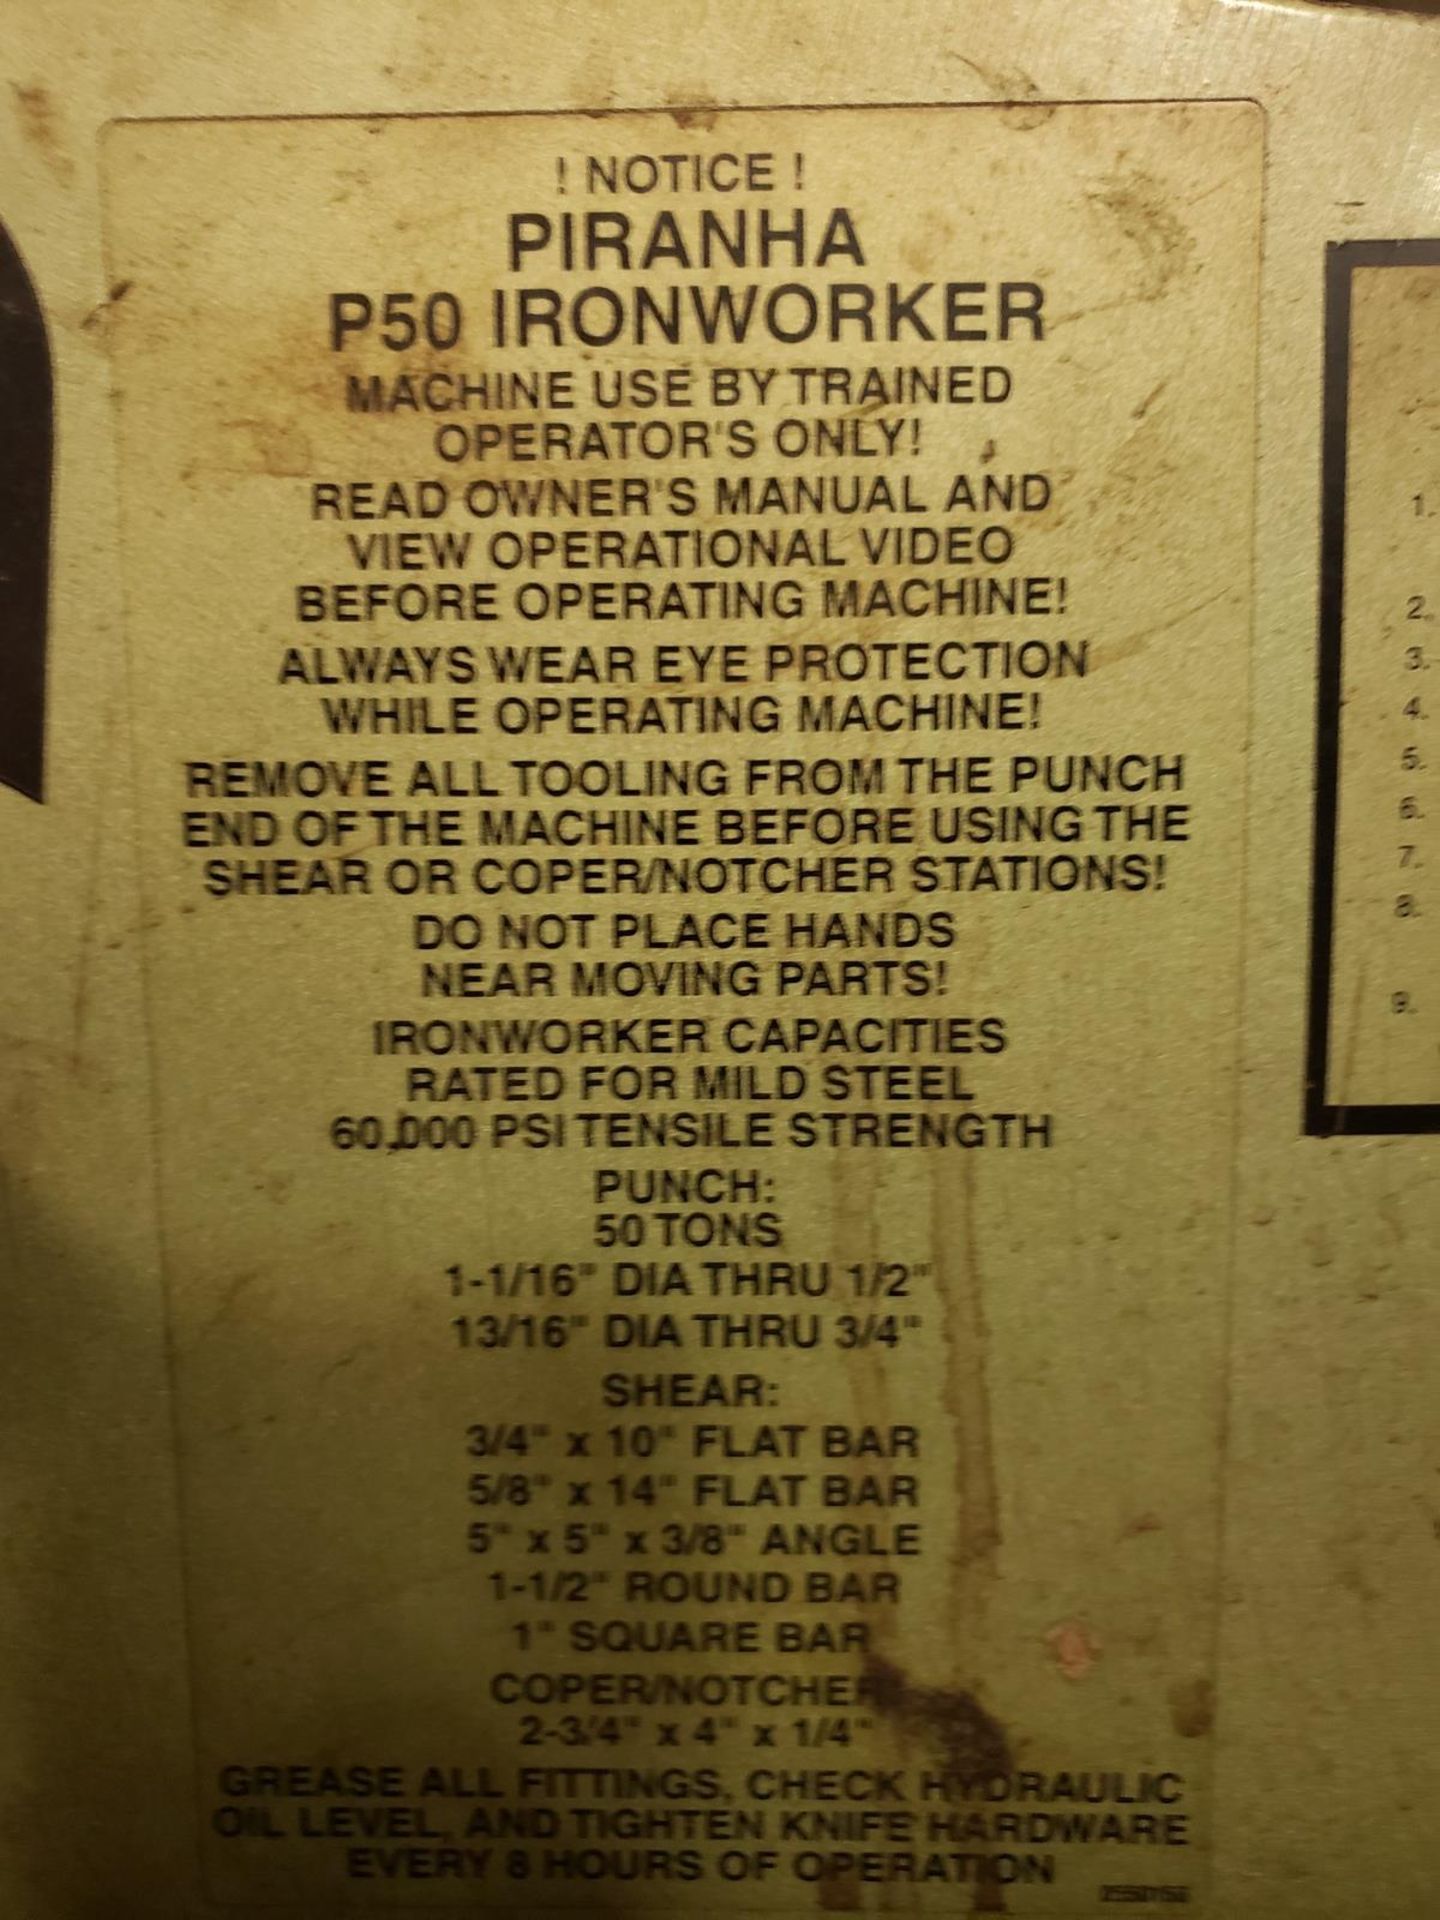 Piranha Ironworker, M# P50, S/N P50 6276, W/ Tooling | Rig Fee $310 - Image 3 of 6